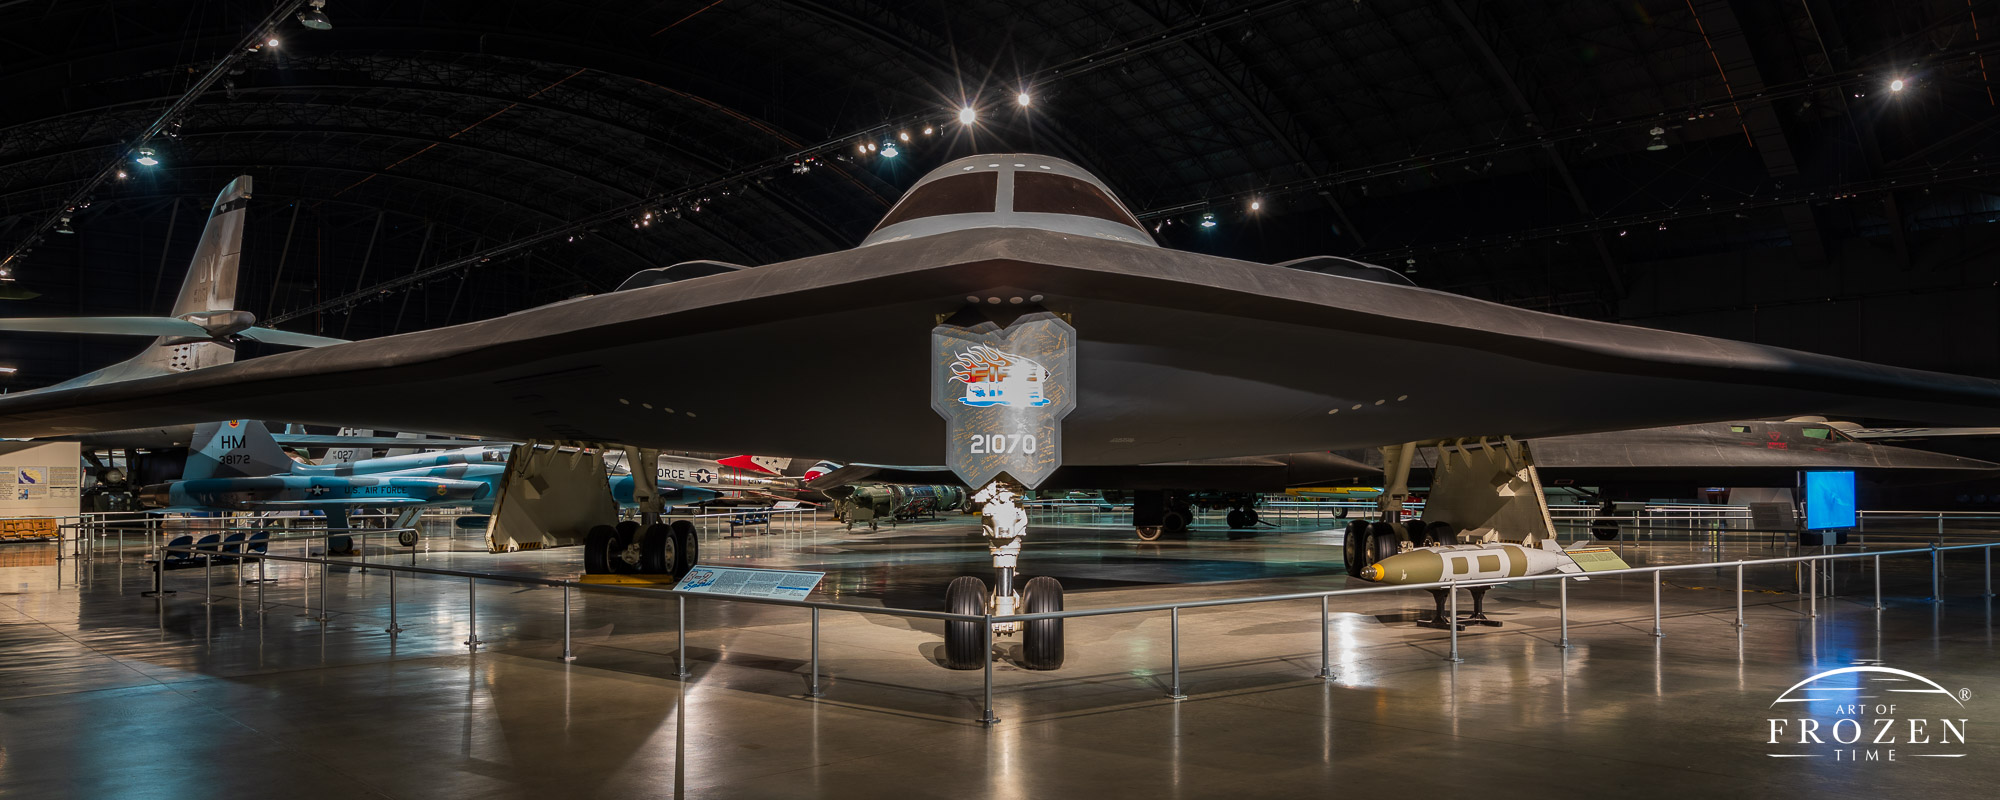 A front view of the B2 Stealth Bomber as it sits in the Air Force Museum.